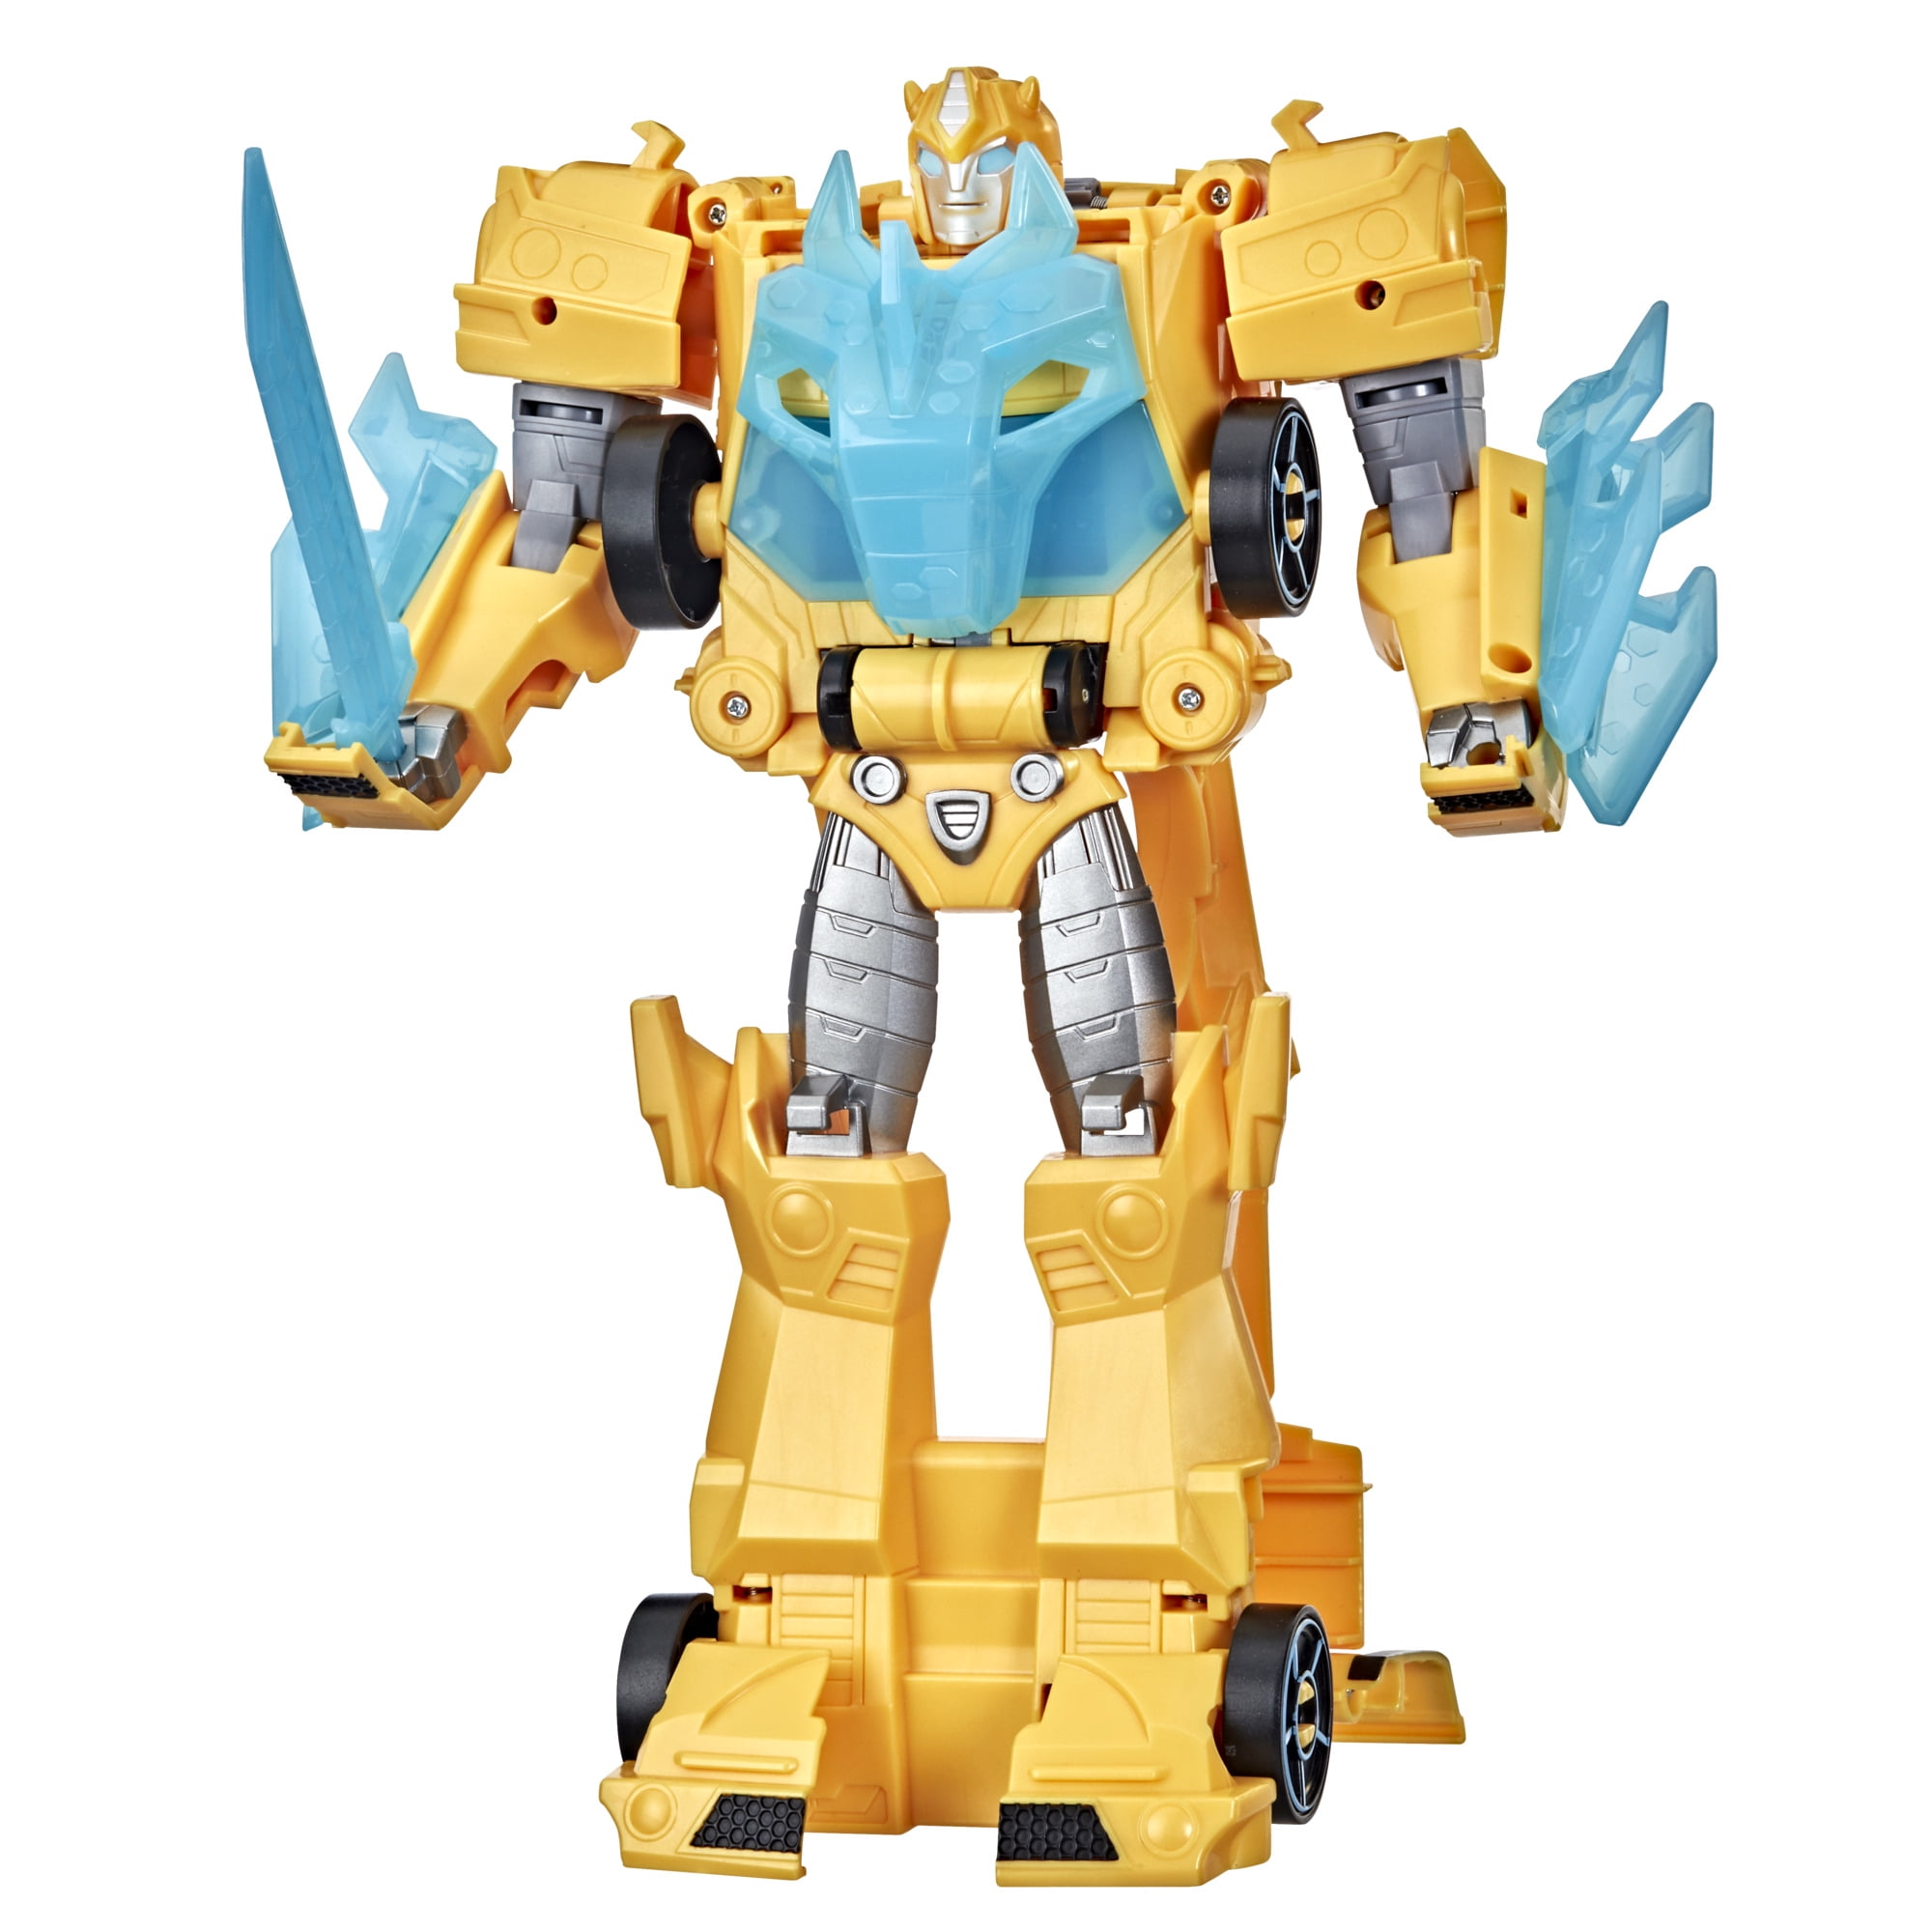 Transformers Bumblebee Robot Warrior With Sounds & Lights NEW Ideal Toy Gift 